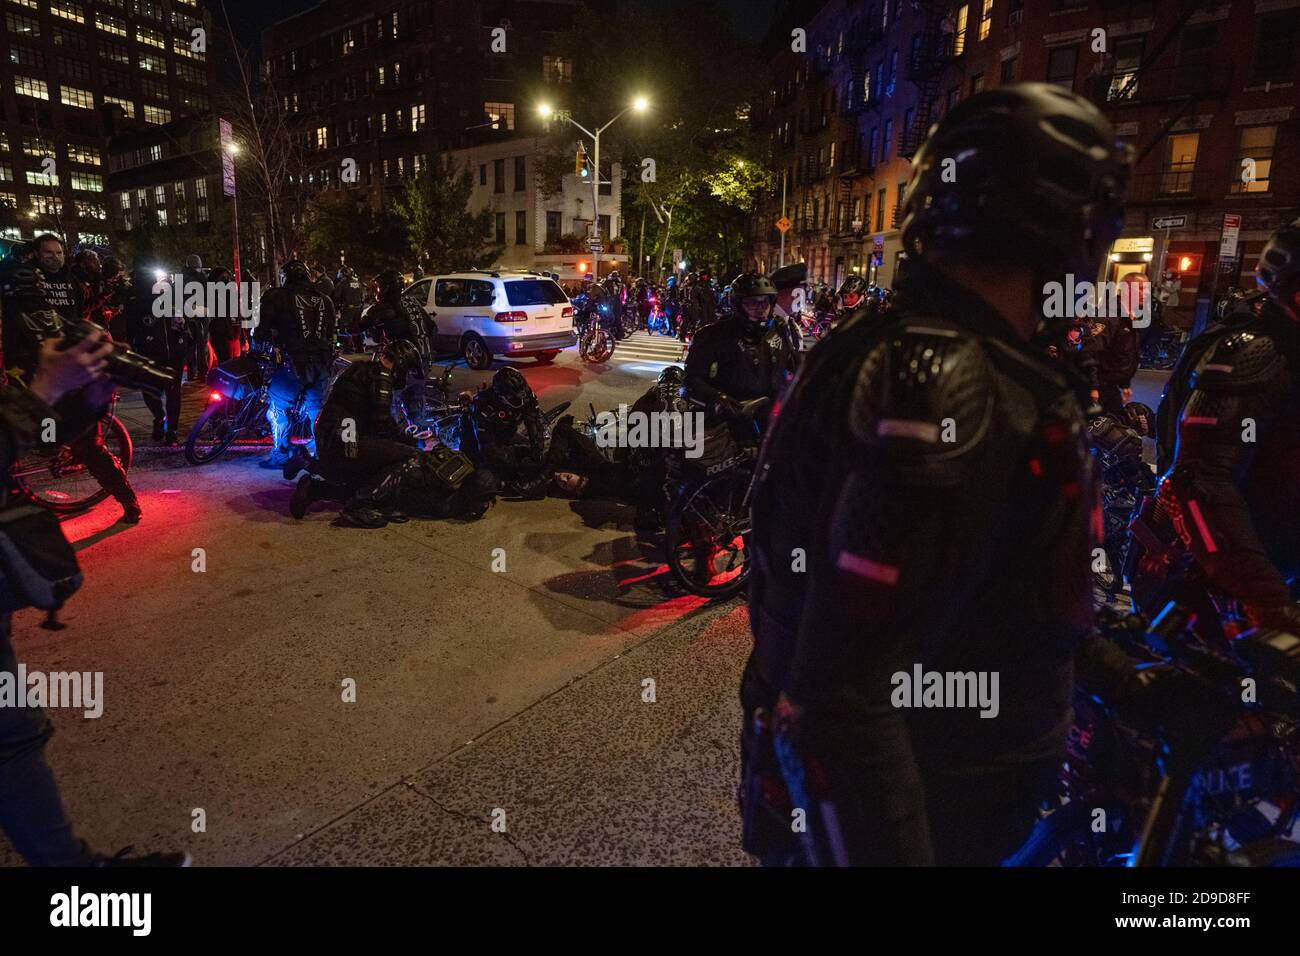 New York, New York, US. Nov 4th 2020. New York City police detain two people during a post-election anti-Trump march  through the city's Greenwich Village neighborhood Stock Photo